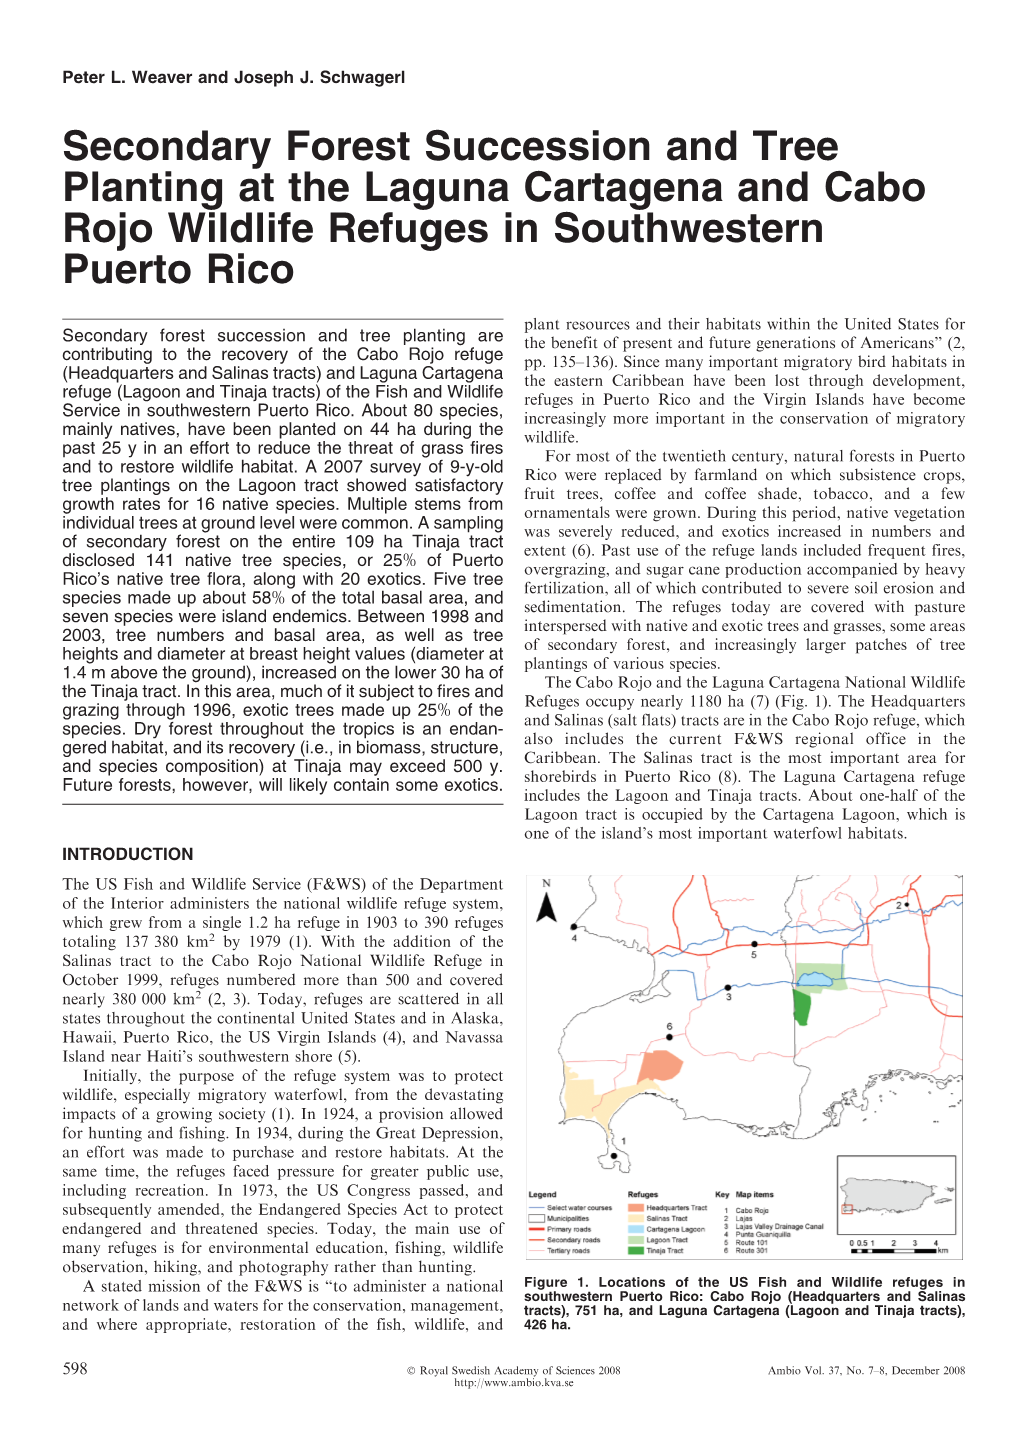 Secondary Forest Succession and Tree Planting at the Laguna Cartagena and Cabo Rojo Wildlife Refuges in Southwestern Puerto Rico